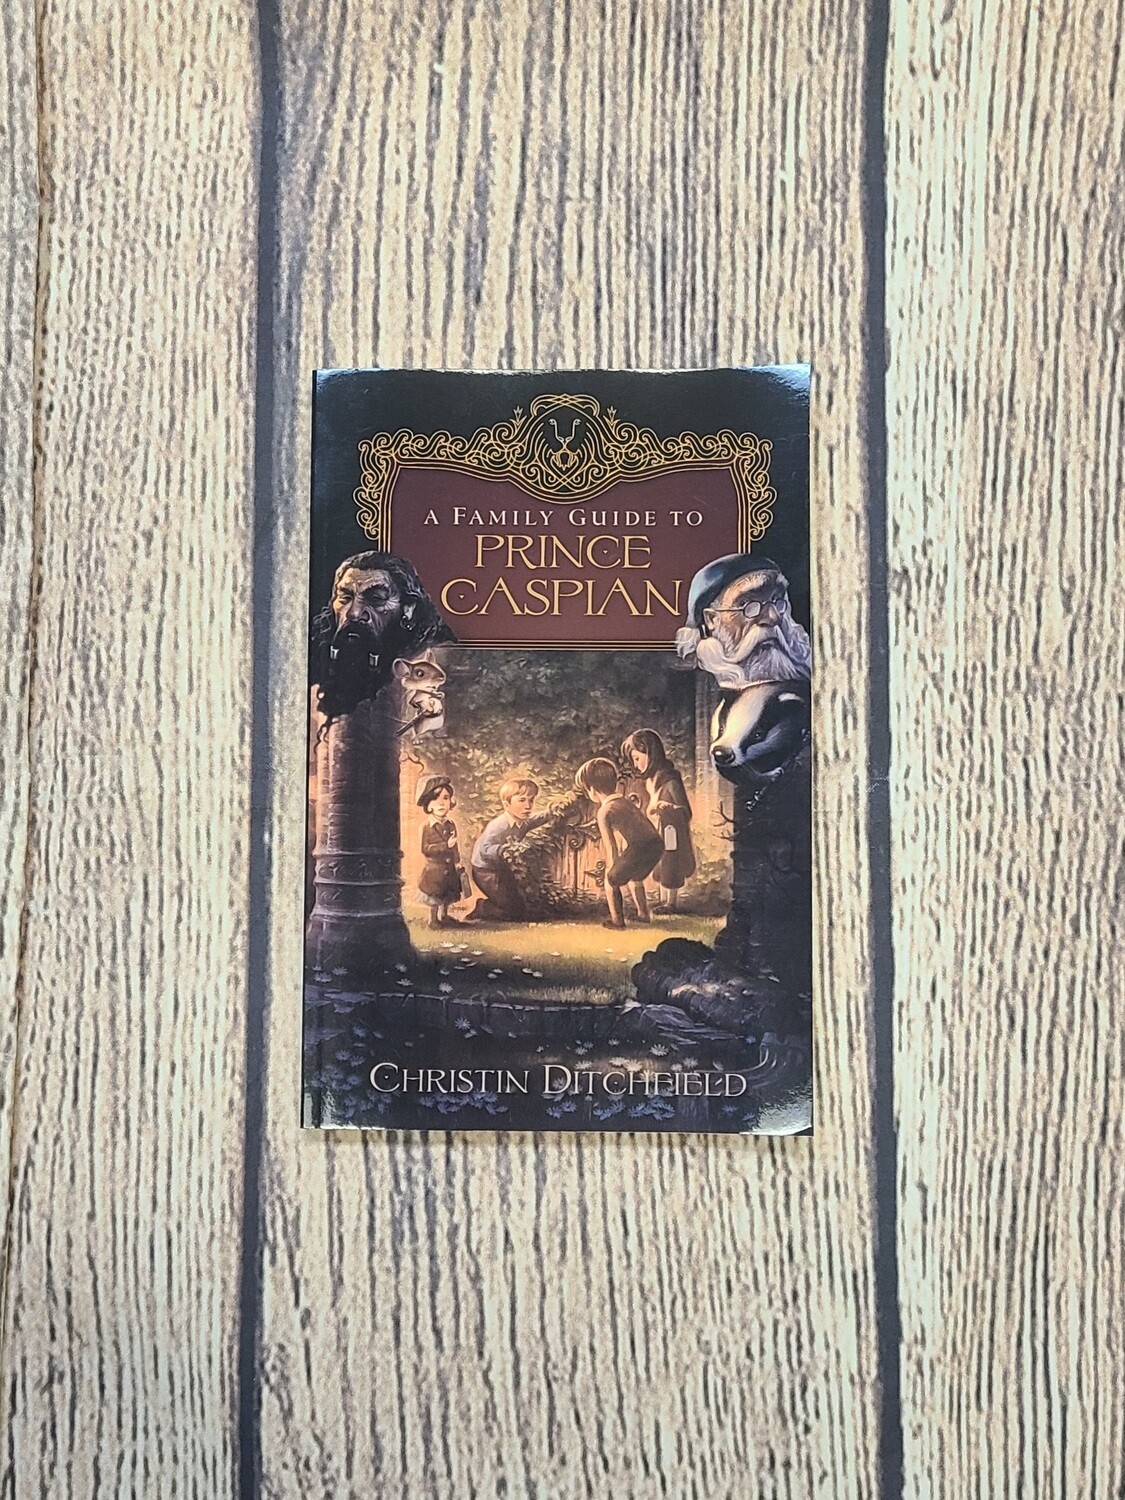 A Family Guide to Prince Caspian by Christin Ditchfield